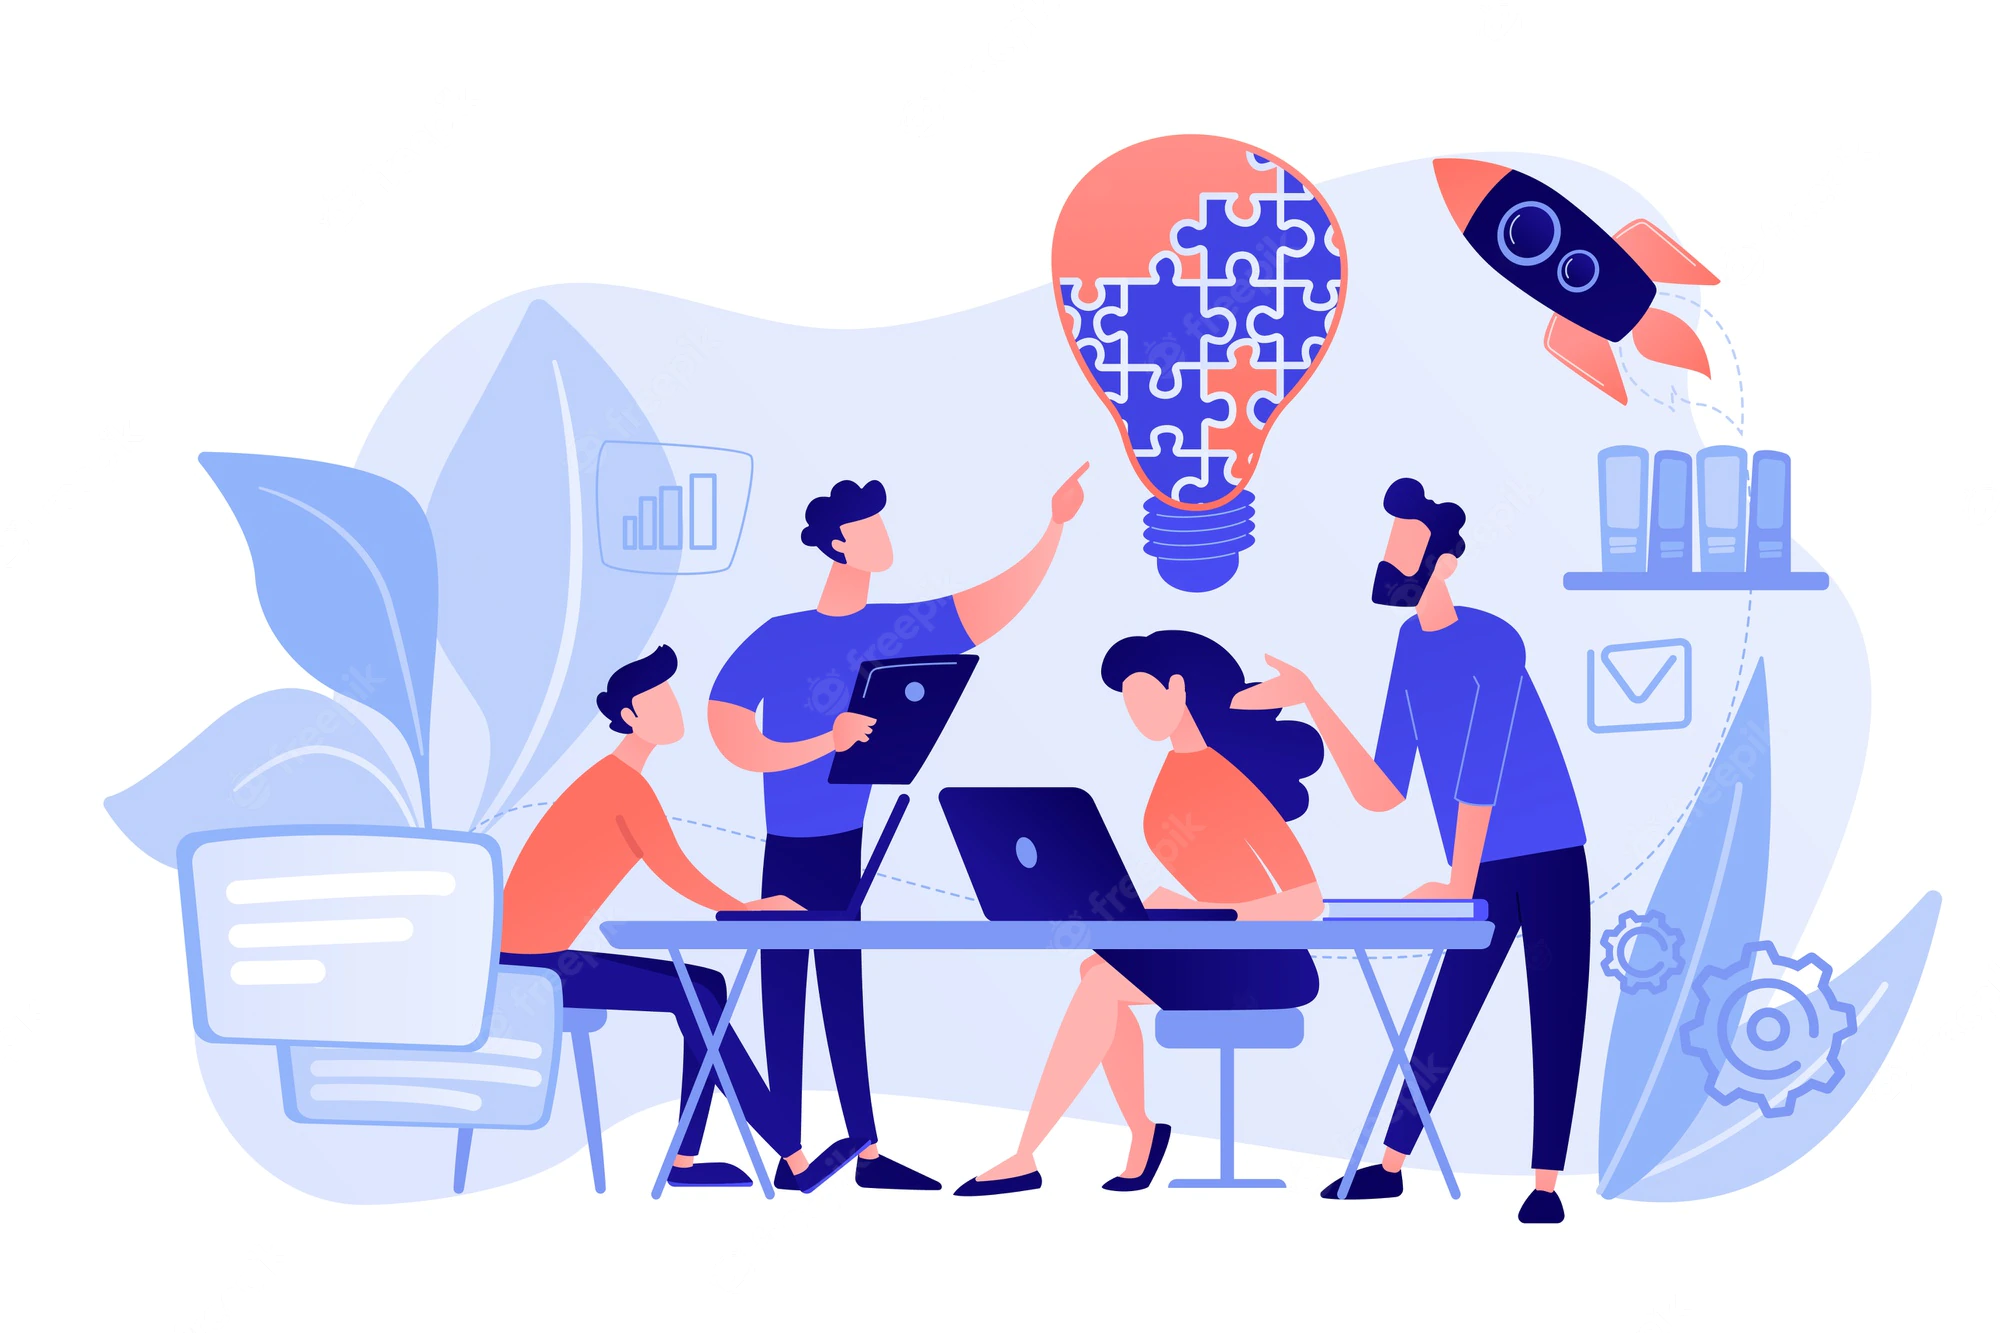 business-team-brainstorm-idea-lightbulb-from-jigsaw-working-team-collaboration-enterprise-cooperation-colleagues-mutual-assistance-concept-pinkish-coral-bluevector-isolated-illustration_335657-1651.webp